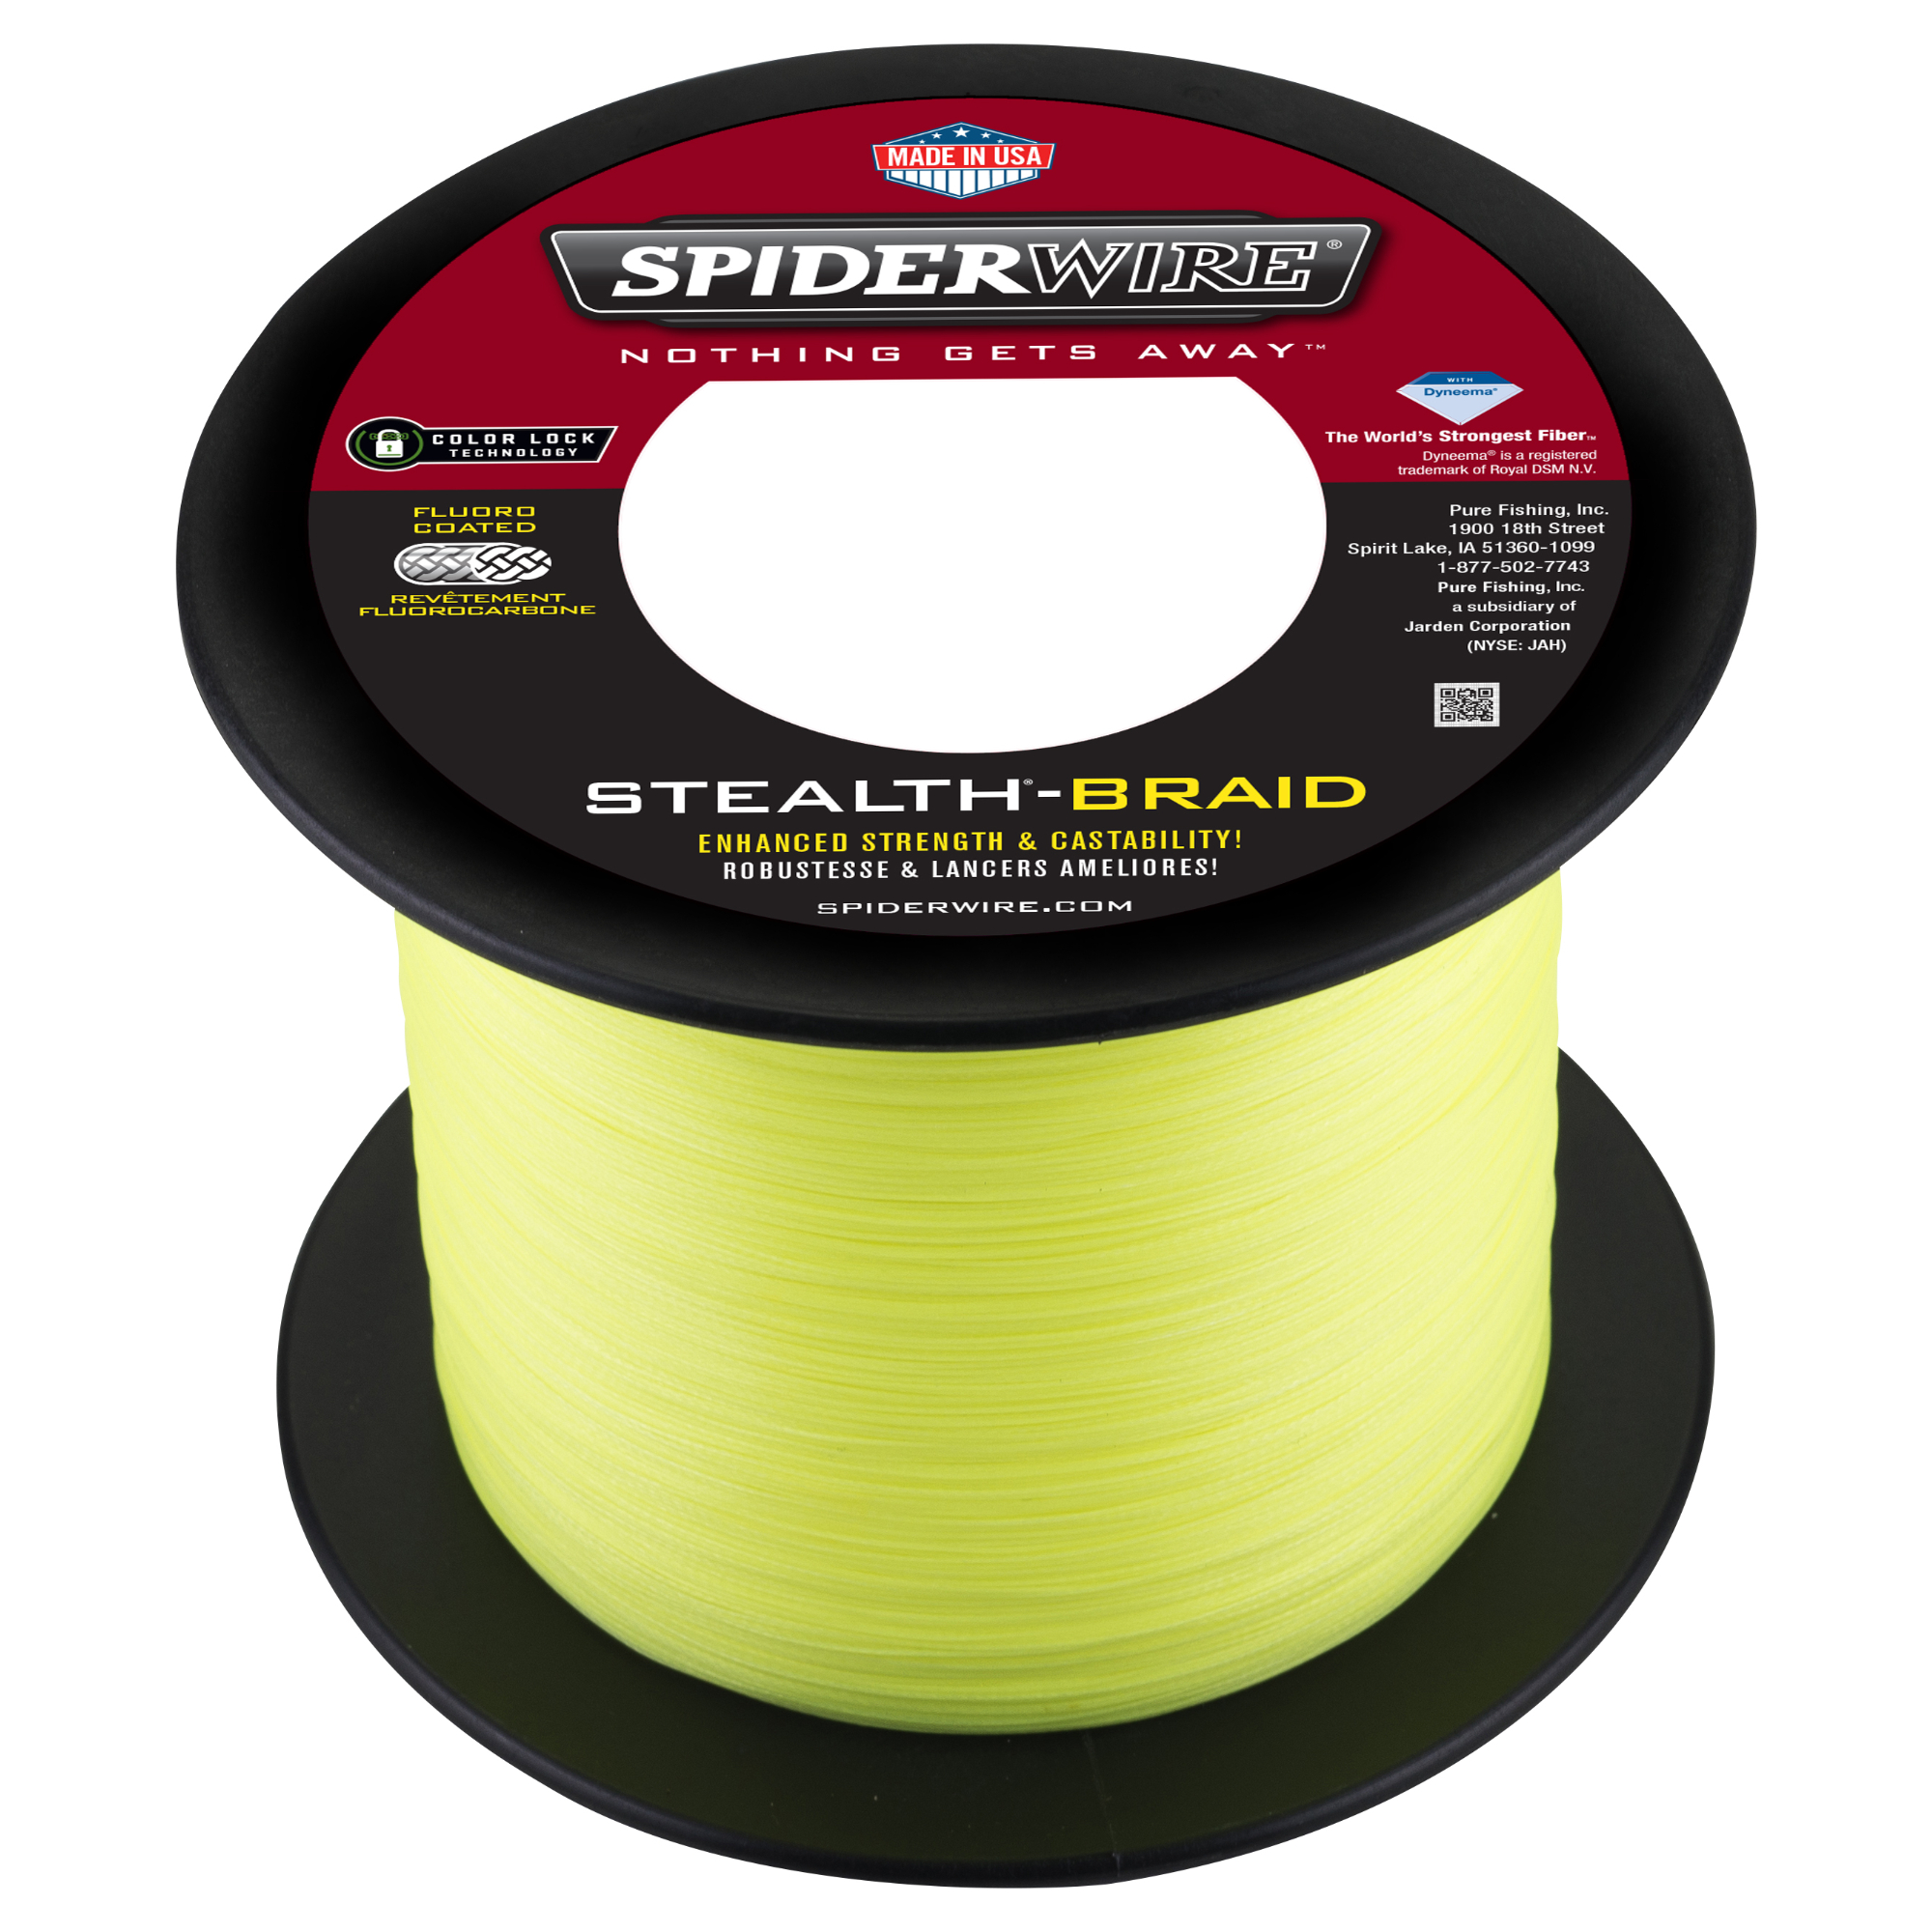 Spiderwire Stealth Fishing Line 30 lb. Hi-Vis Yellow - 1500 Yds